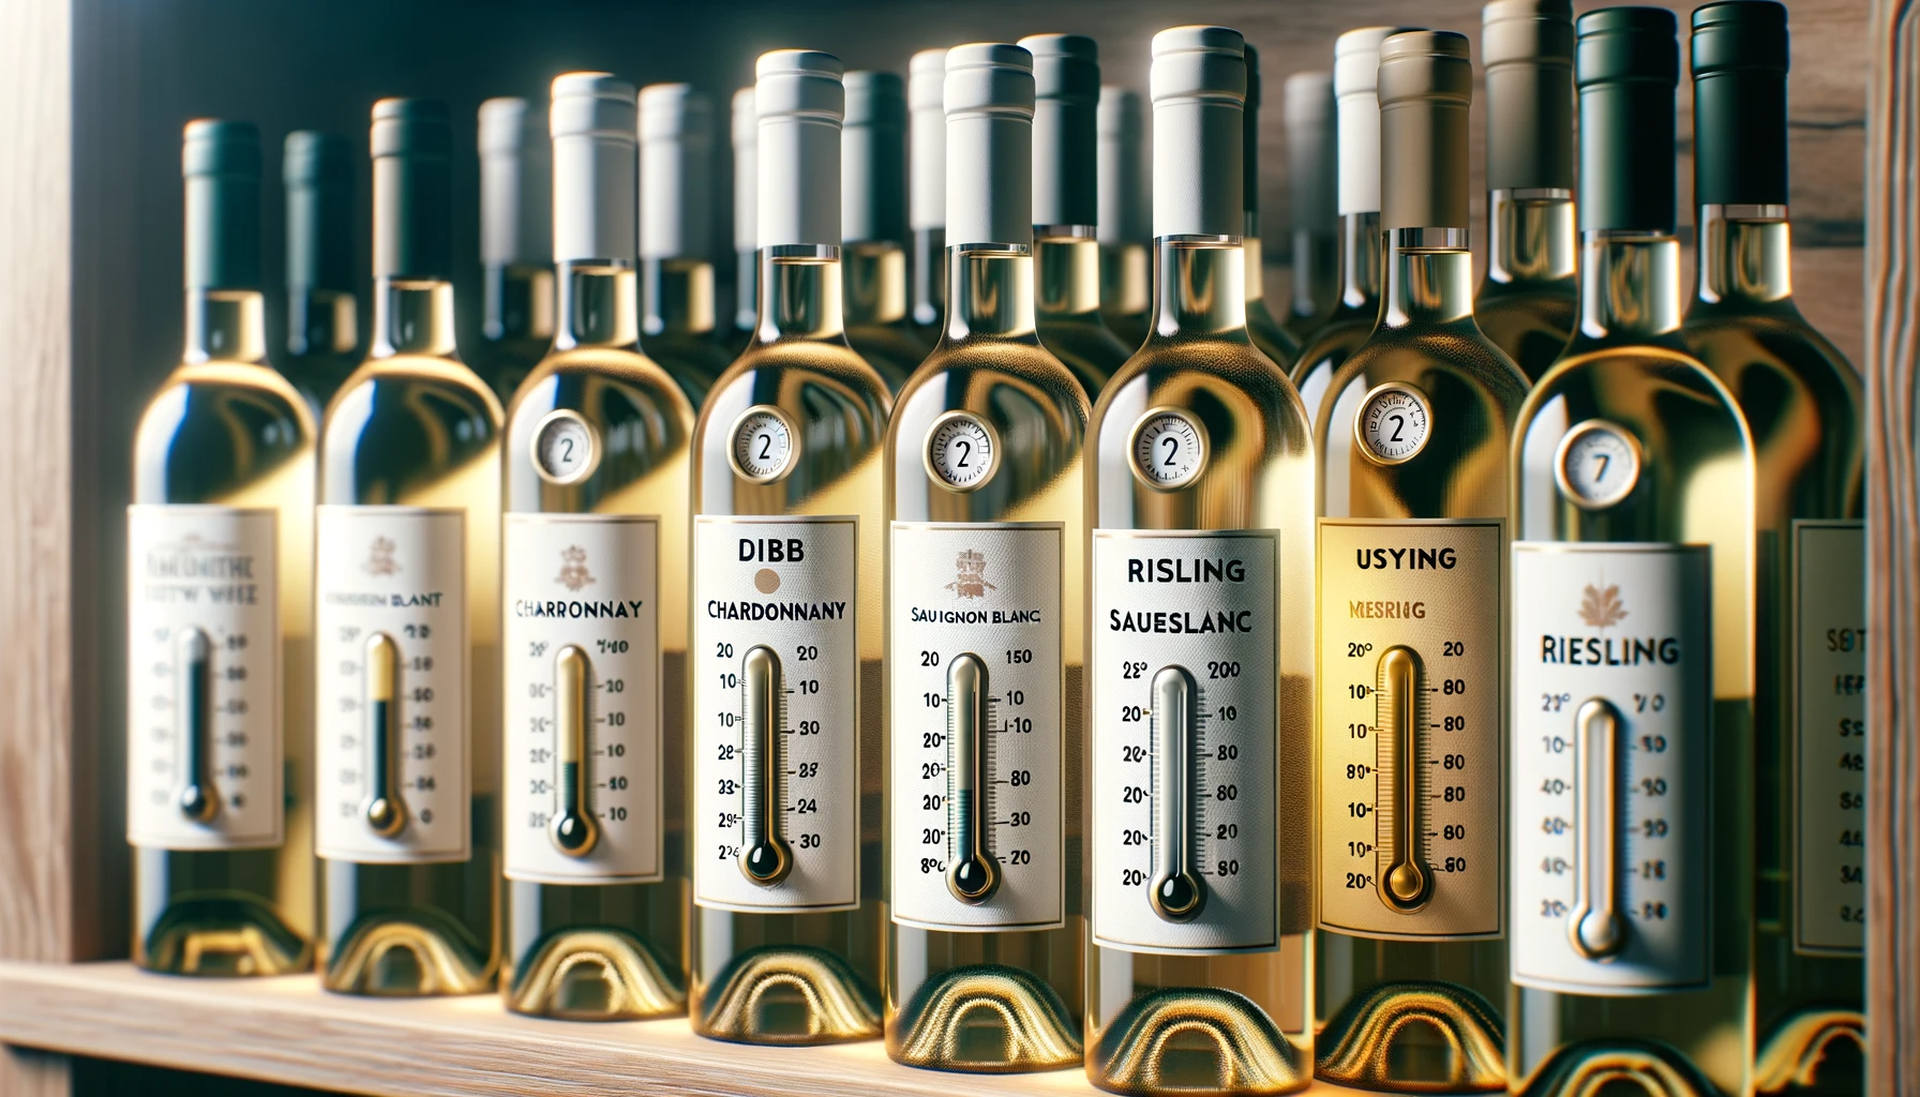 What Temperature Should White Wine Be Stored At? Optimal temperature range for storing white wine, featuring a thermometer in a wine cellar.